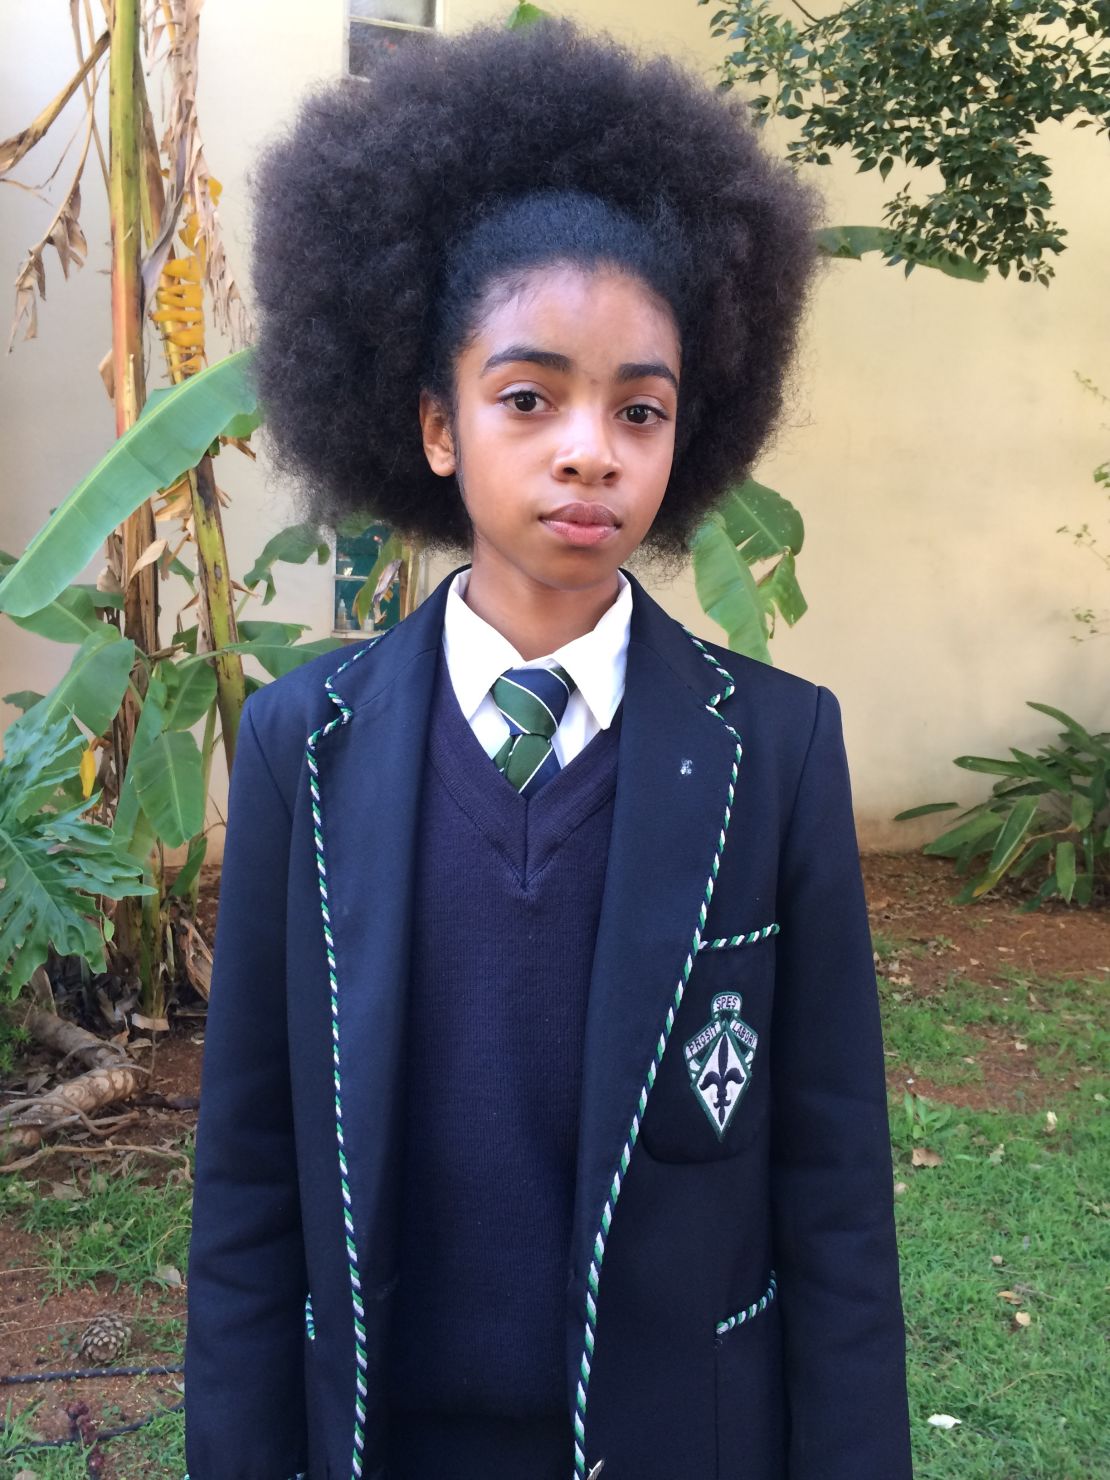 Zulaikha Patel, 13, has been at the forefront of the Pretoria Girls' High protests against racism.